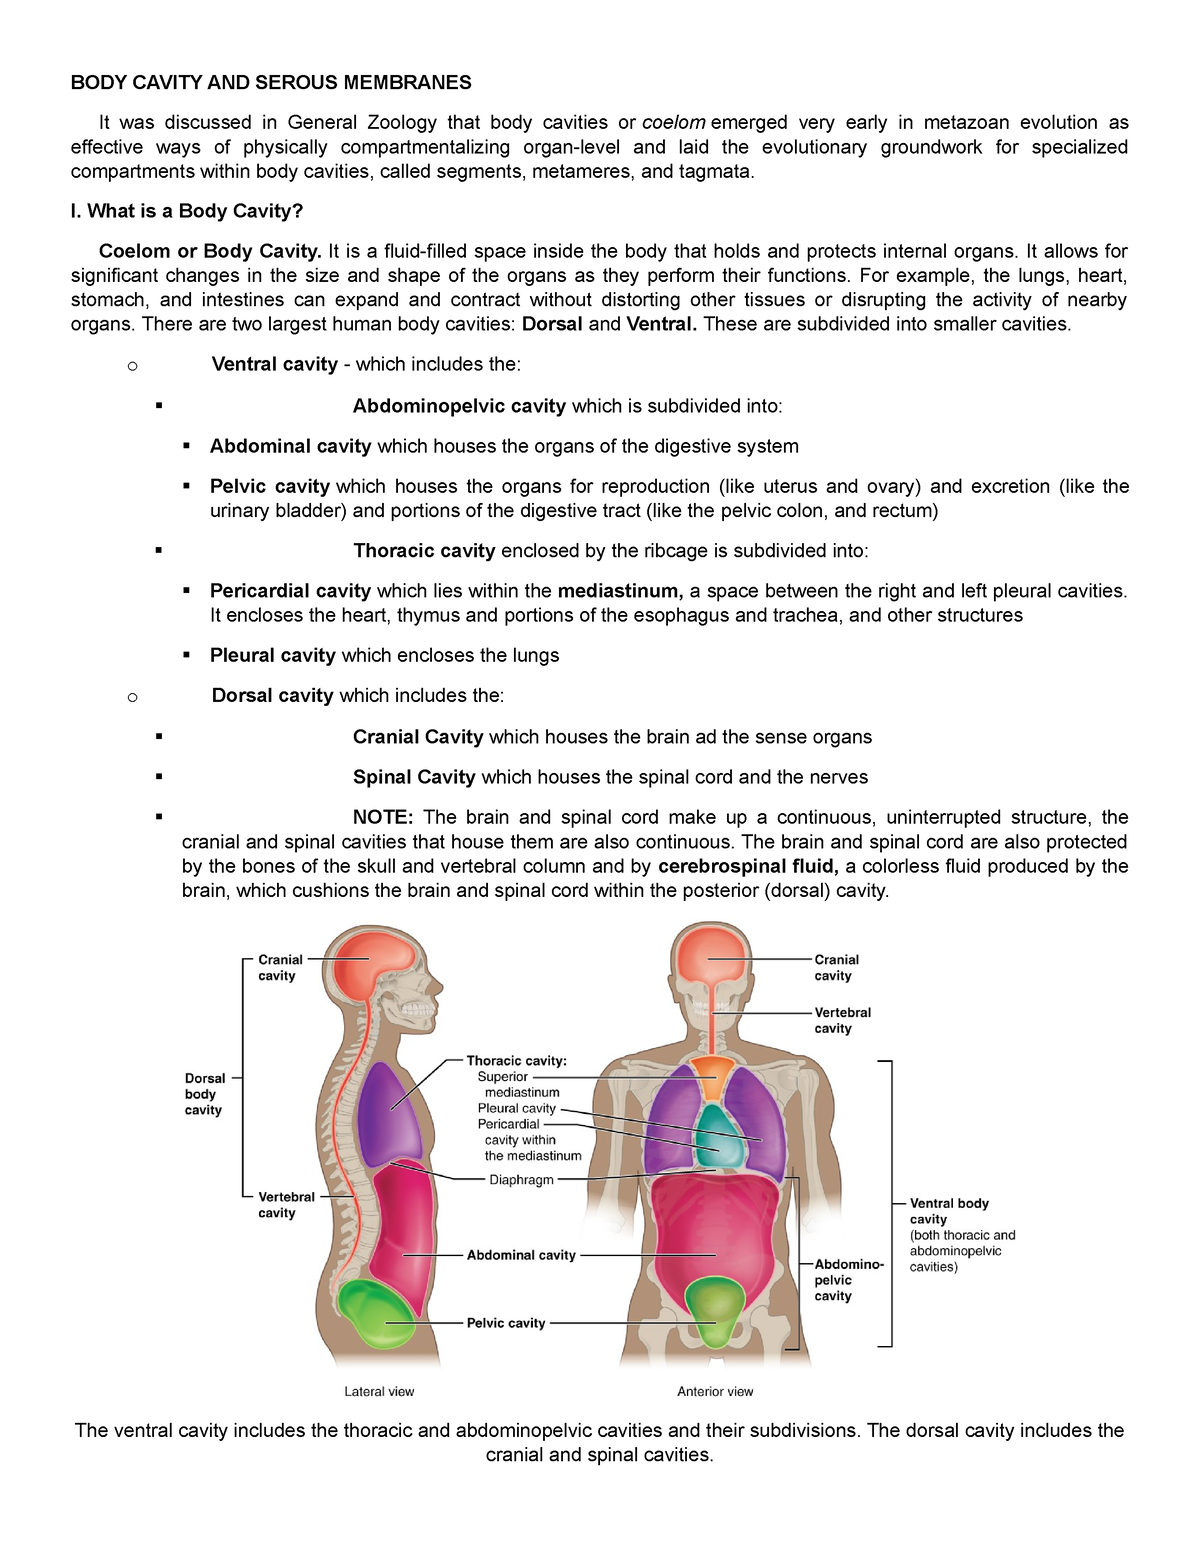 Body Cavities, Serous Membranes, and Tissue Membranes – Medical